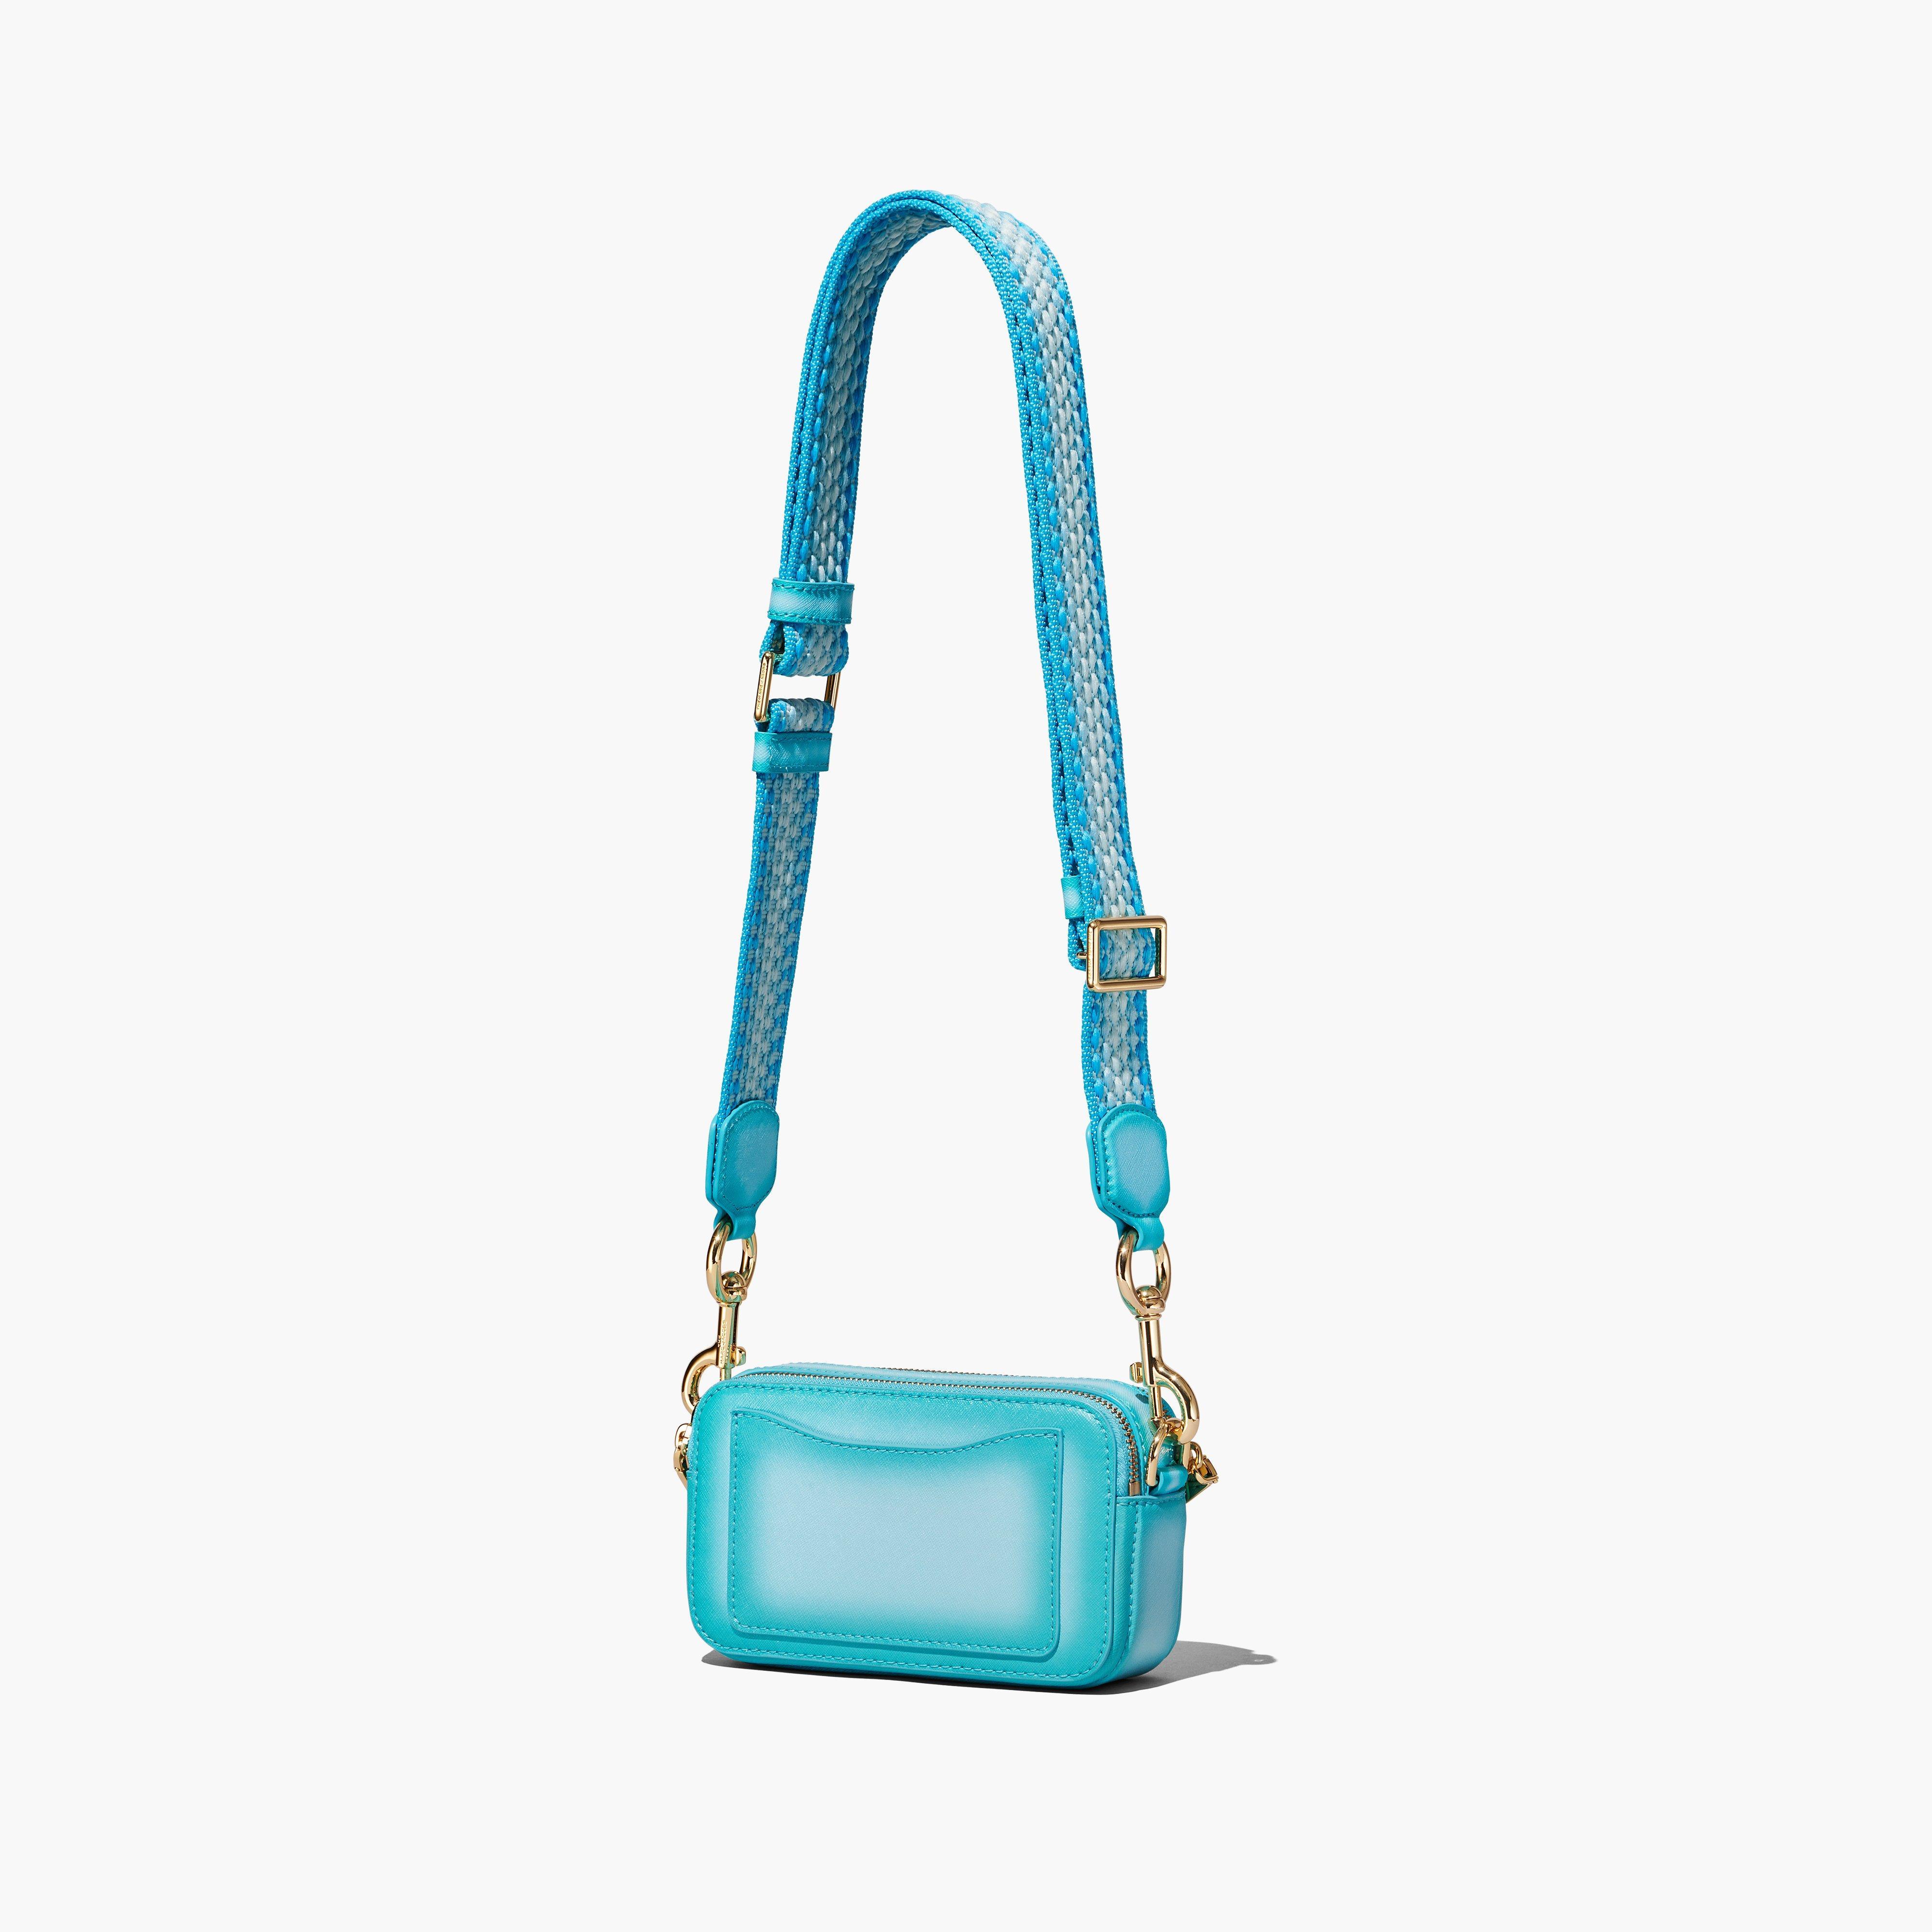 Marc Jacobs Snapshot Crossbody Bag, Lake Blue Multi, New With Tags +  Dustbag